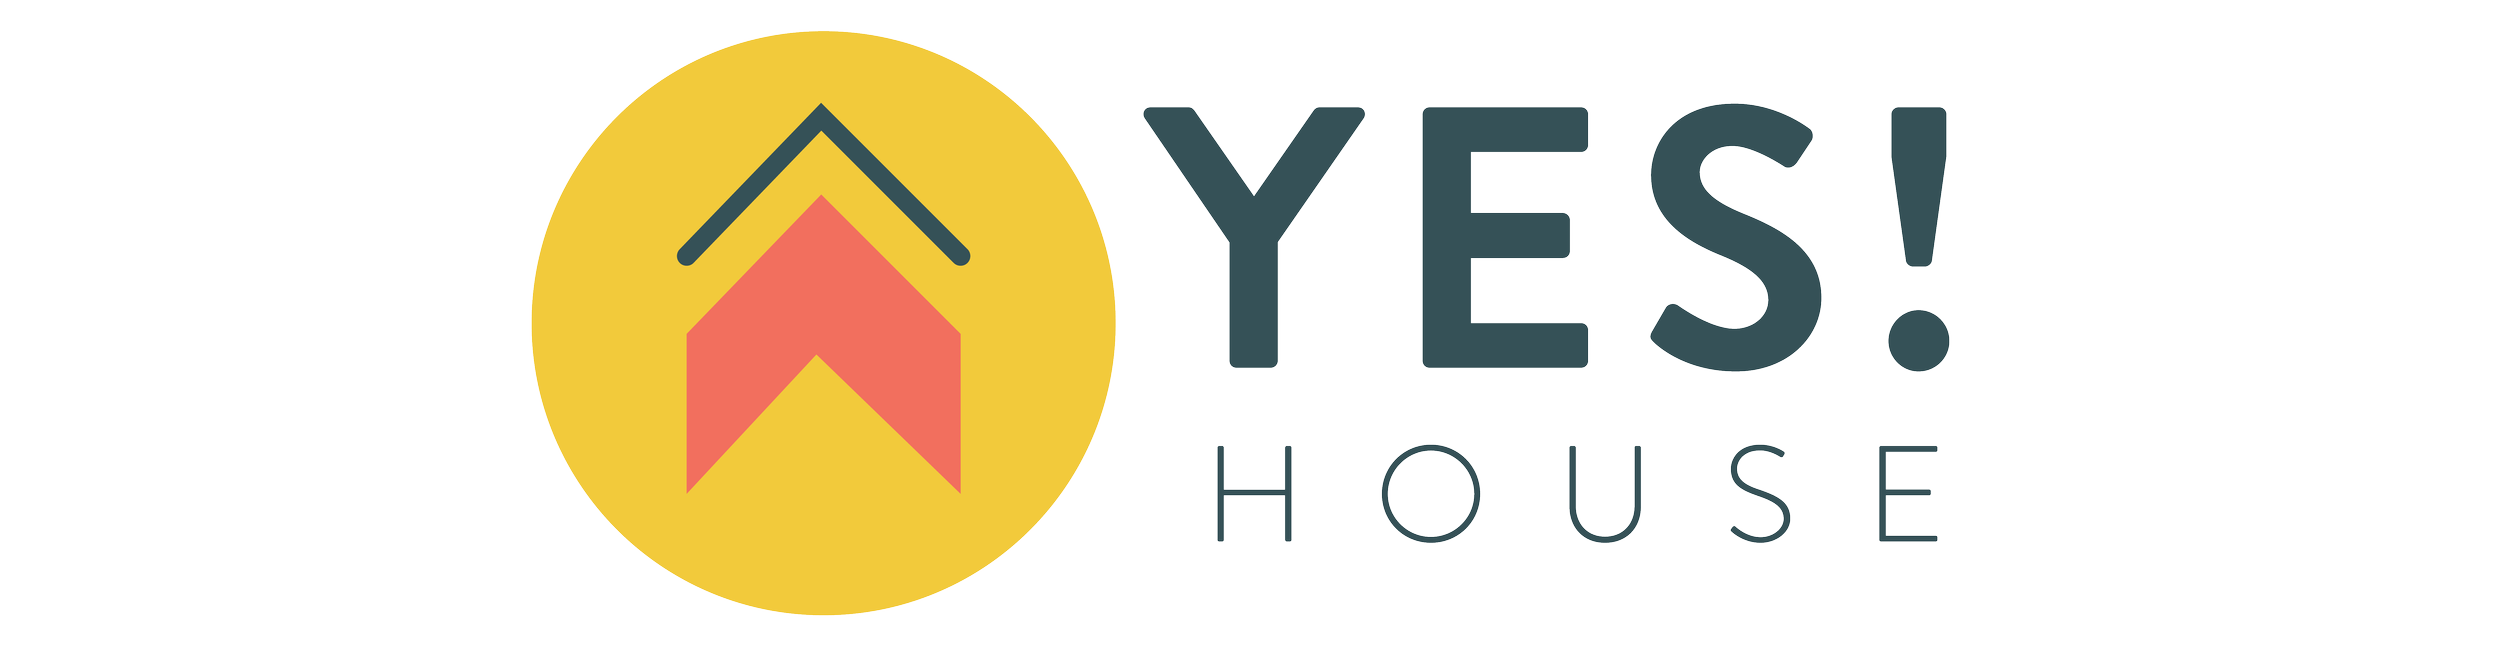 The YES! House